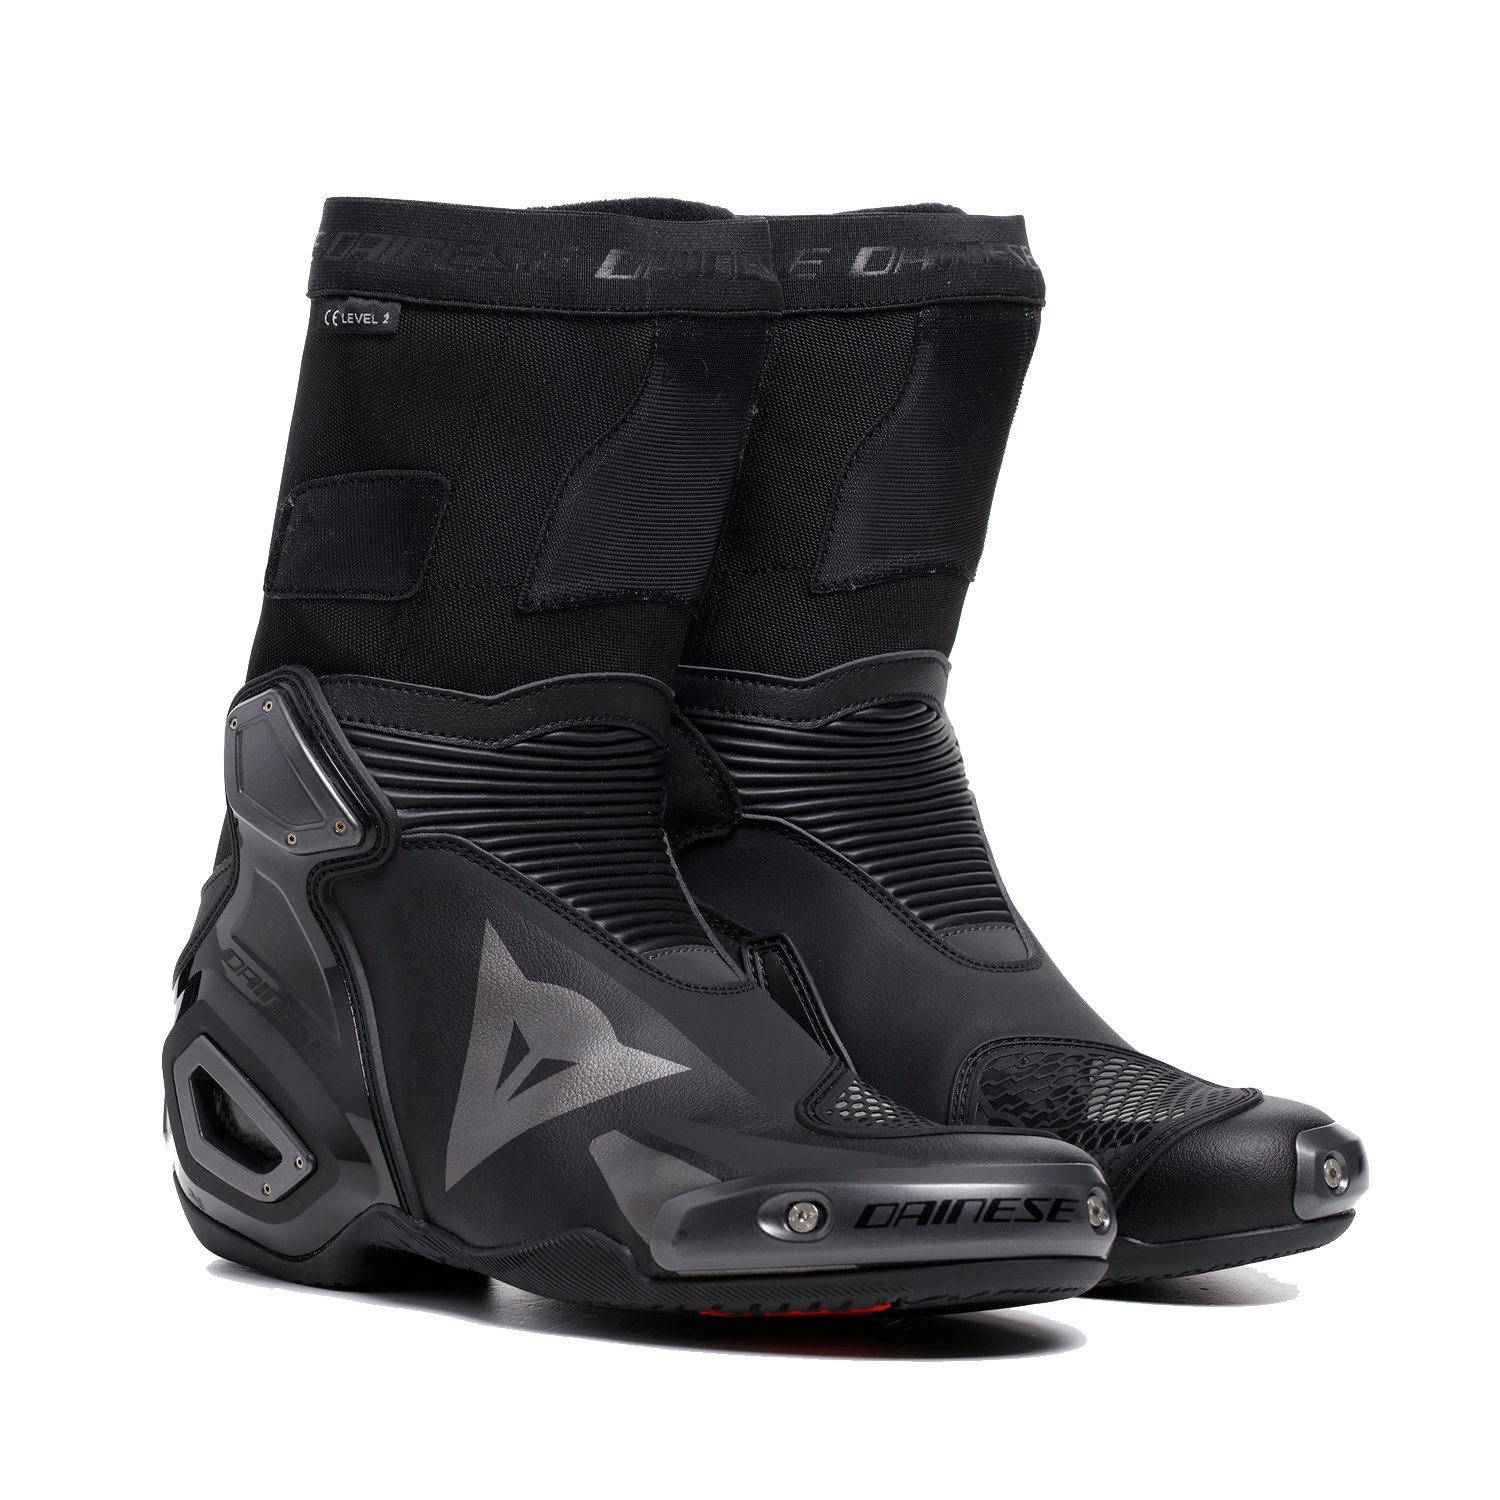 Image of Dainese Axial 2 Boots Black Black Talla 41